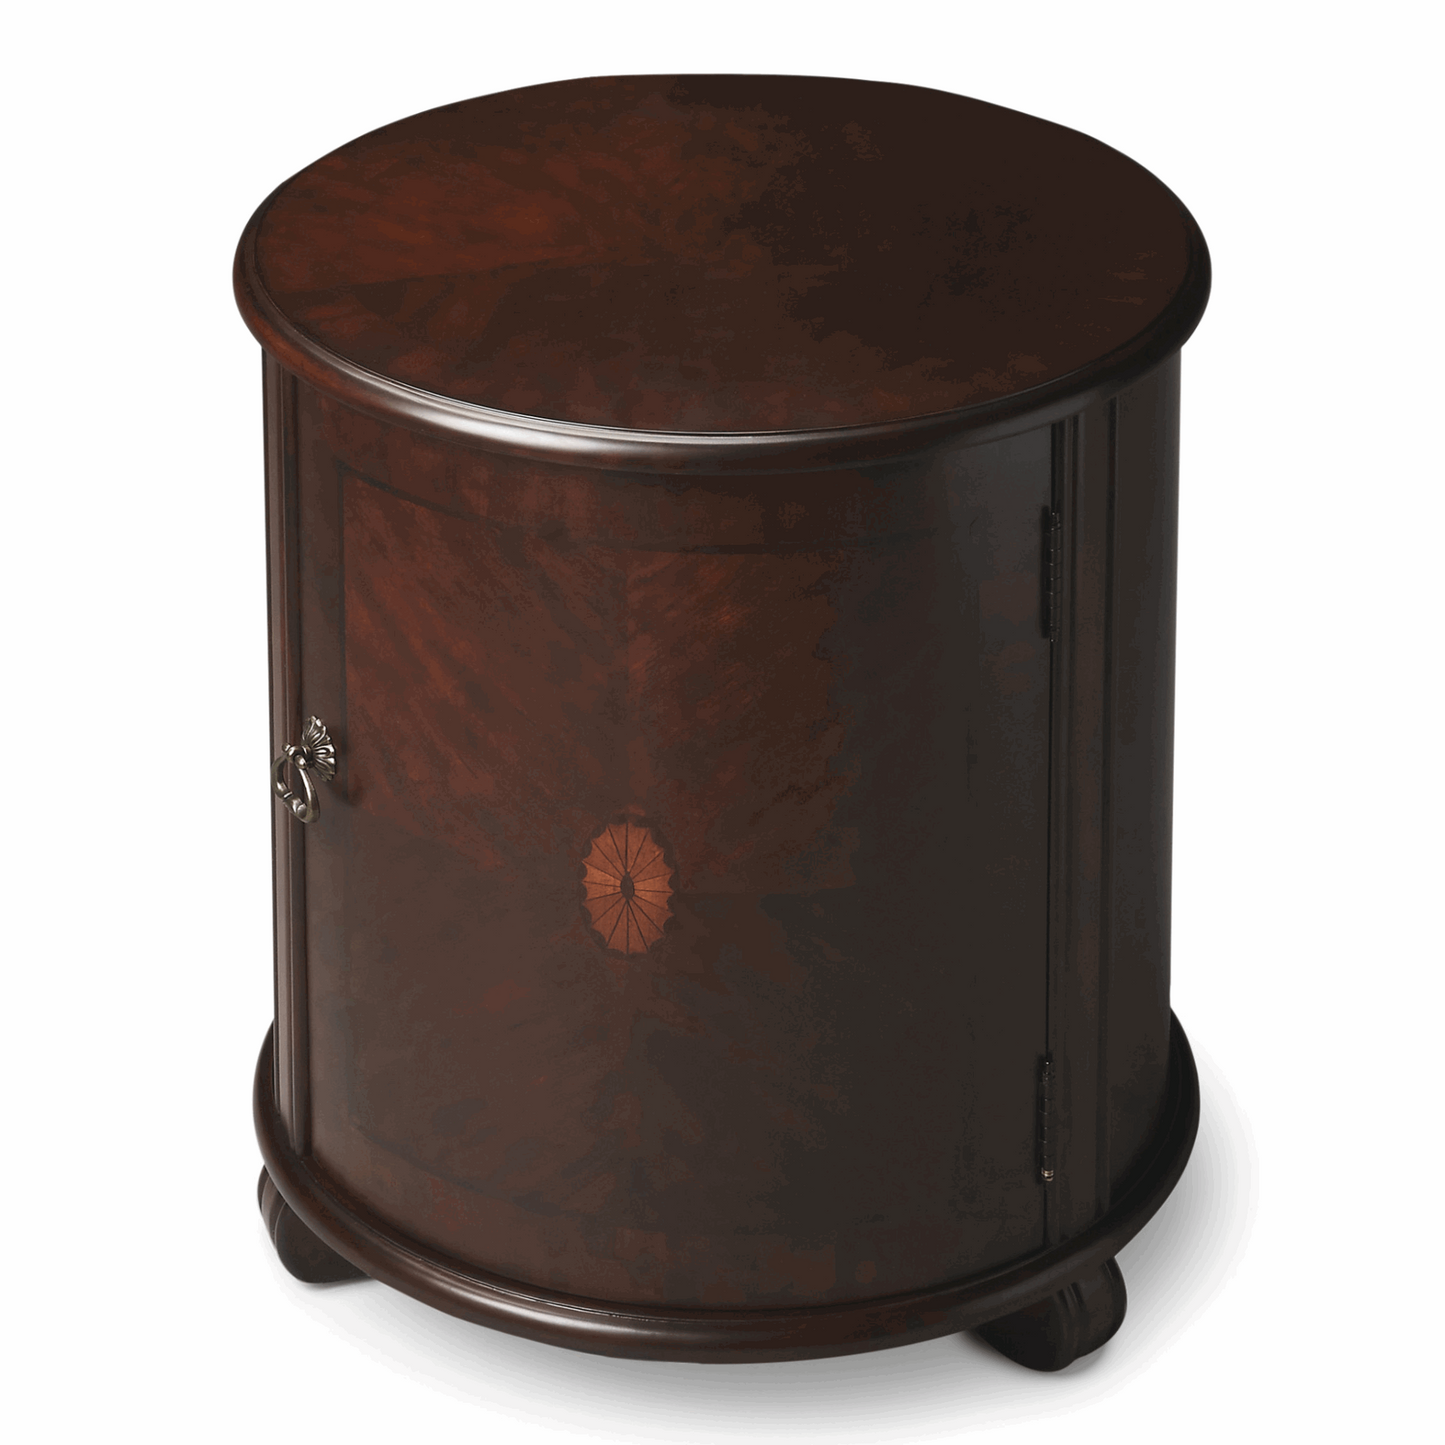 "24"" Dark Brown And Cherry Manufactured Wood Round End Table"